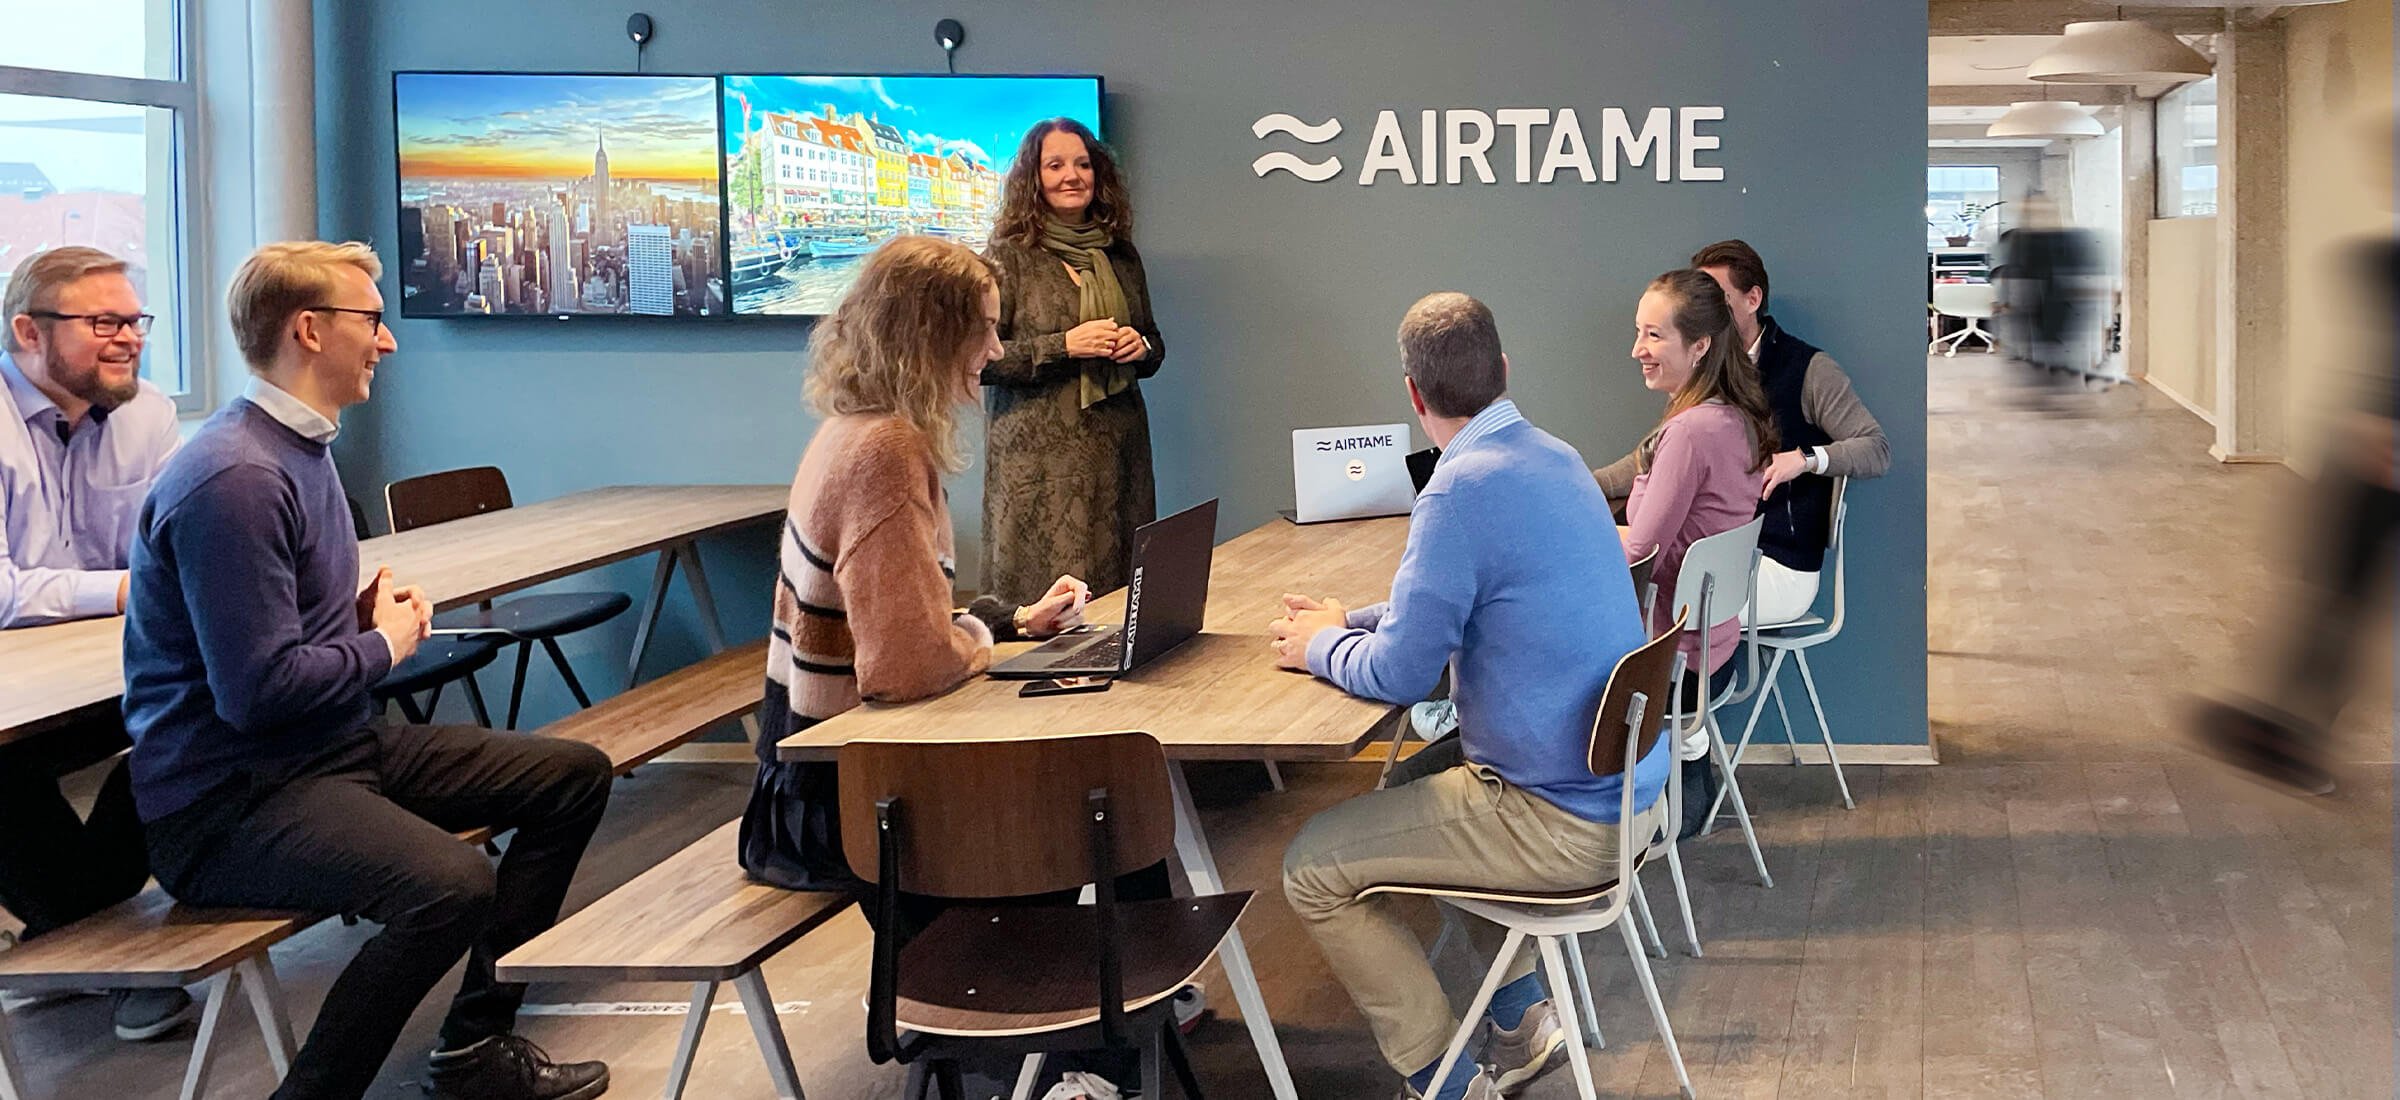 Danish scale-up Airtame introduces SaaS business model and raises 18,5 million DKK to fuel global expansion